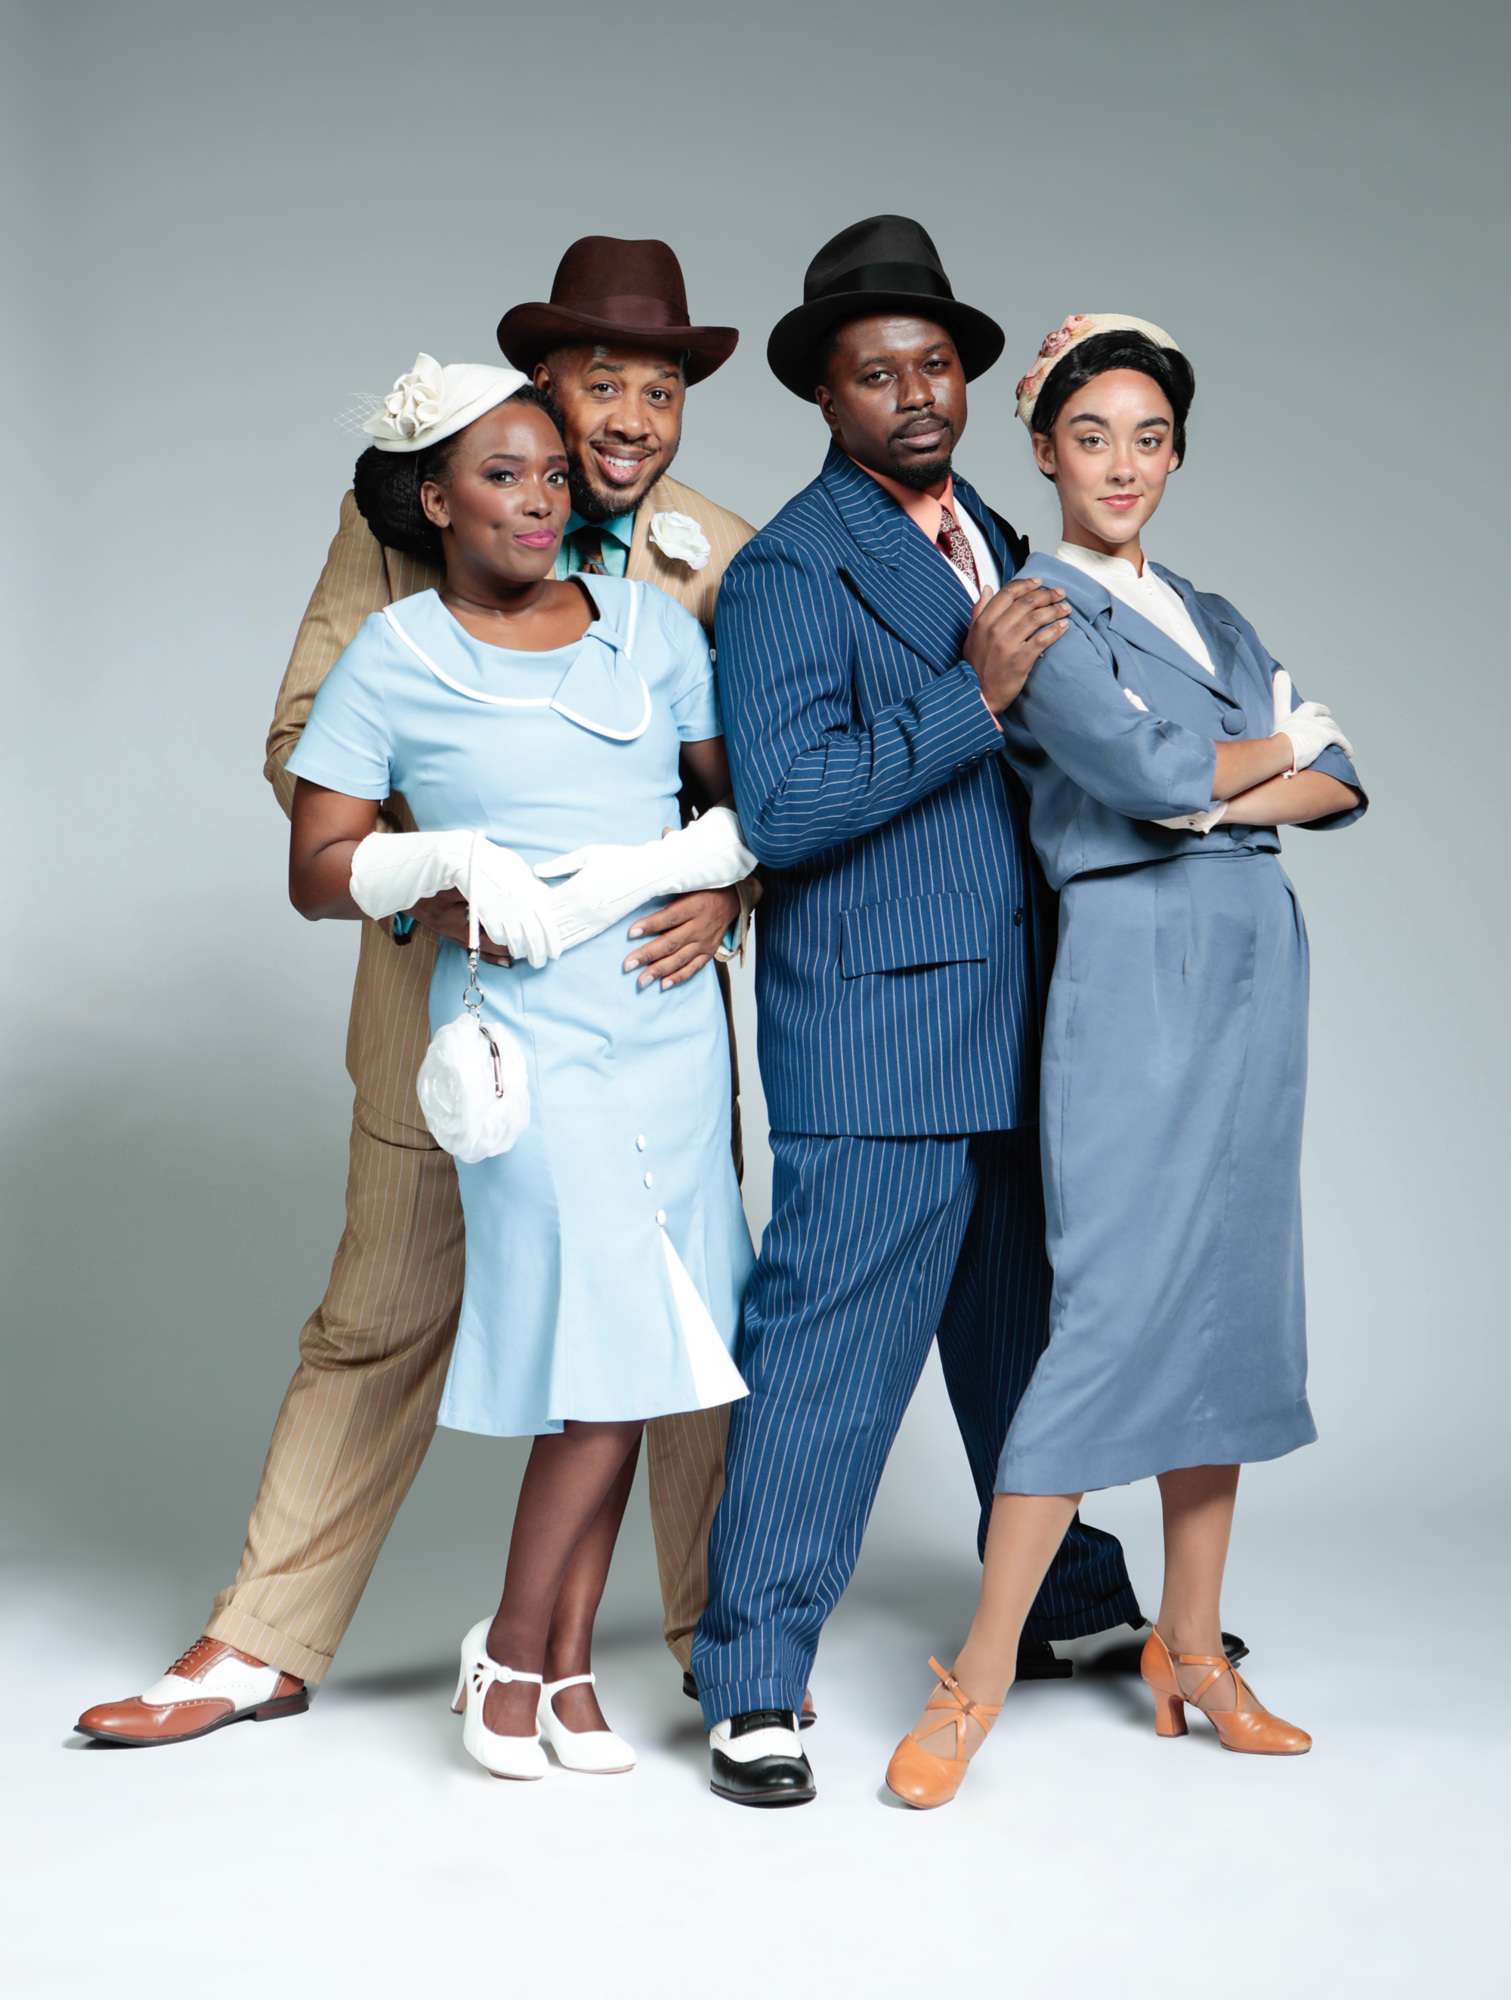 The cast of Guys and Dolls includes Marta McKinnon, Warren G. Nolan Jr., Brian L. Boyd and Kirstin Angelina Henry. (Photo by Sorcha Augustine)